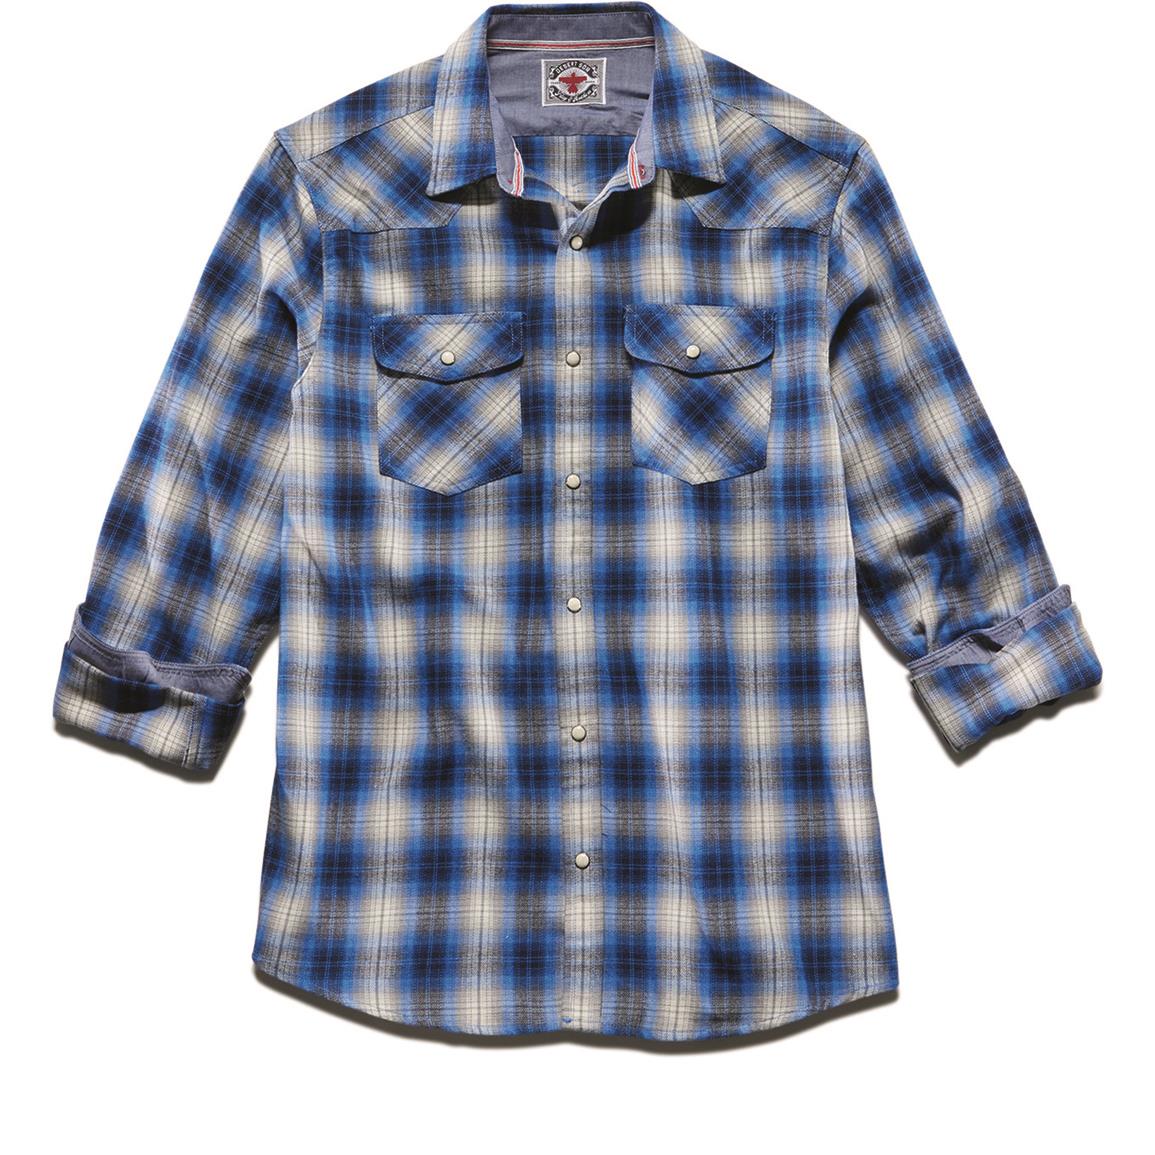 Brushed cotton-blend flannel, Navy/grey/white